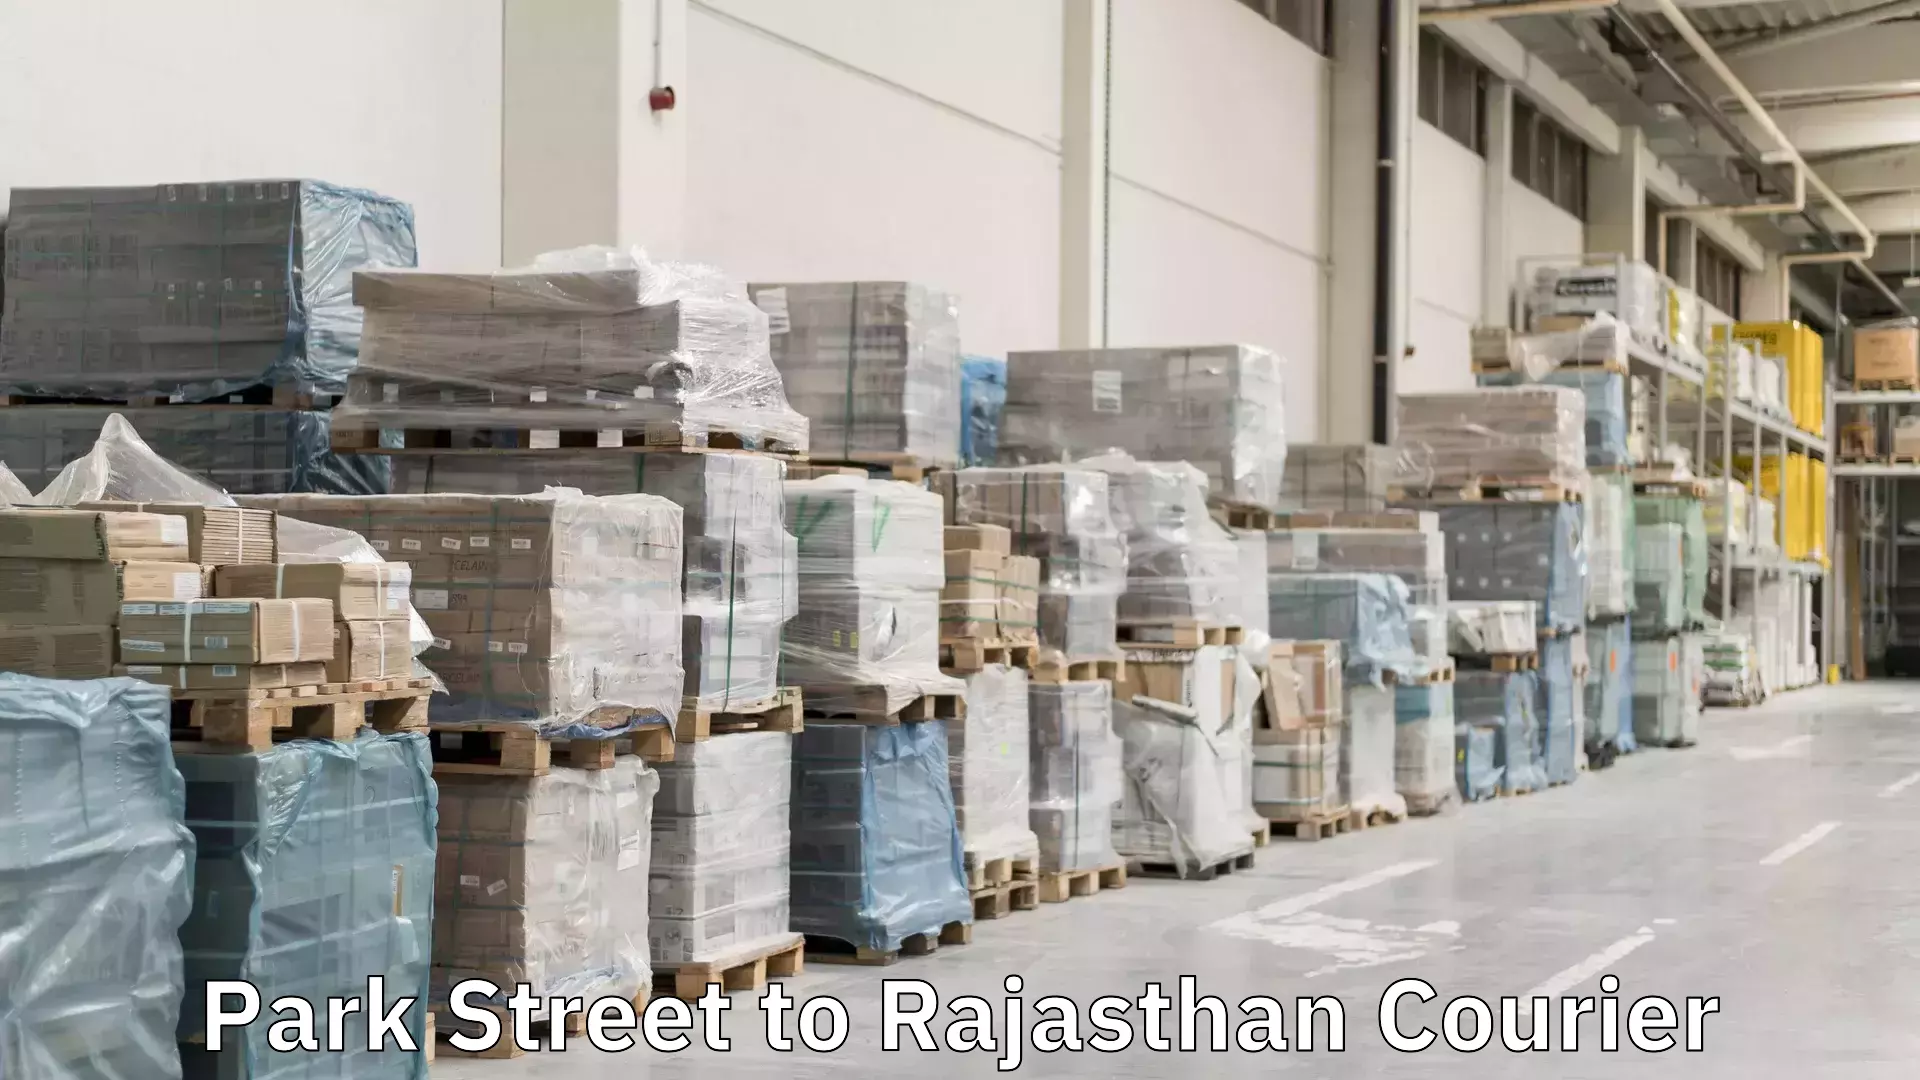 Small business couriers Park Street to Rajasthan